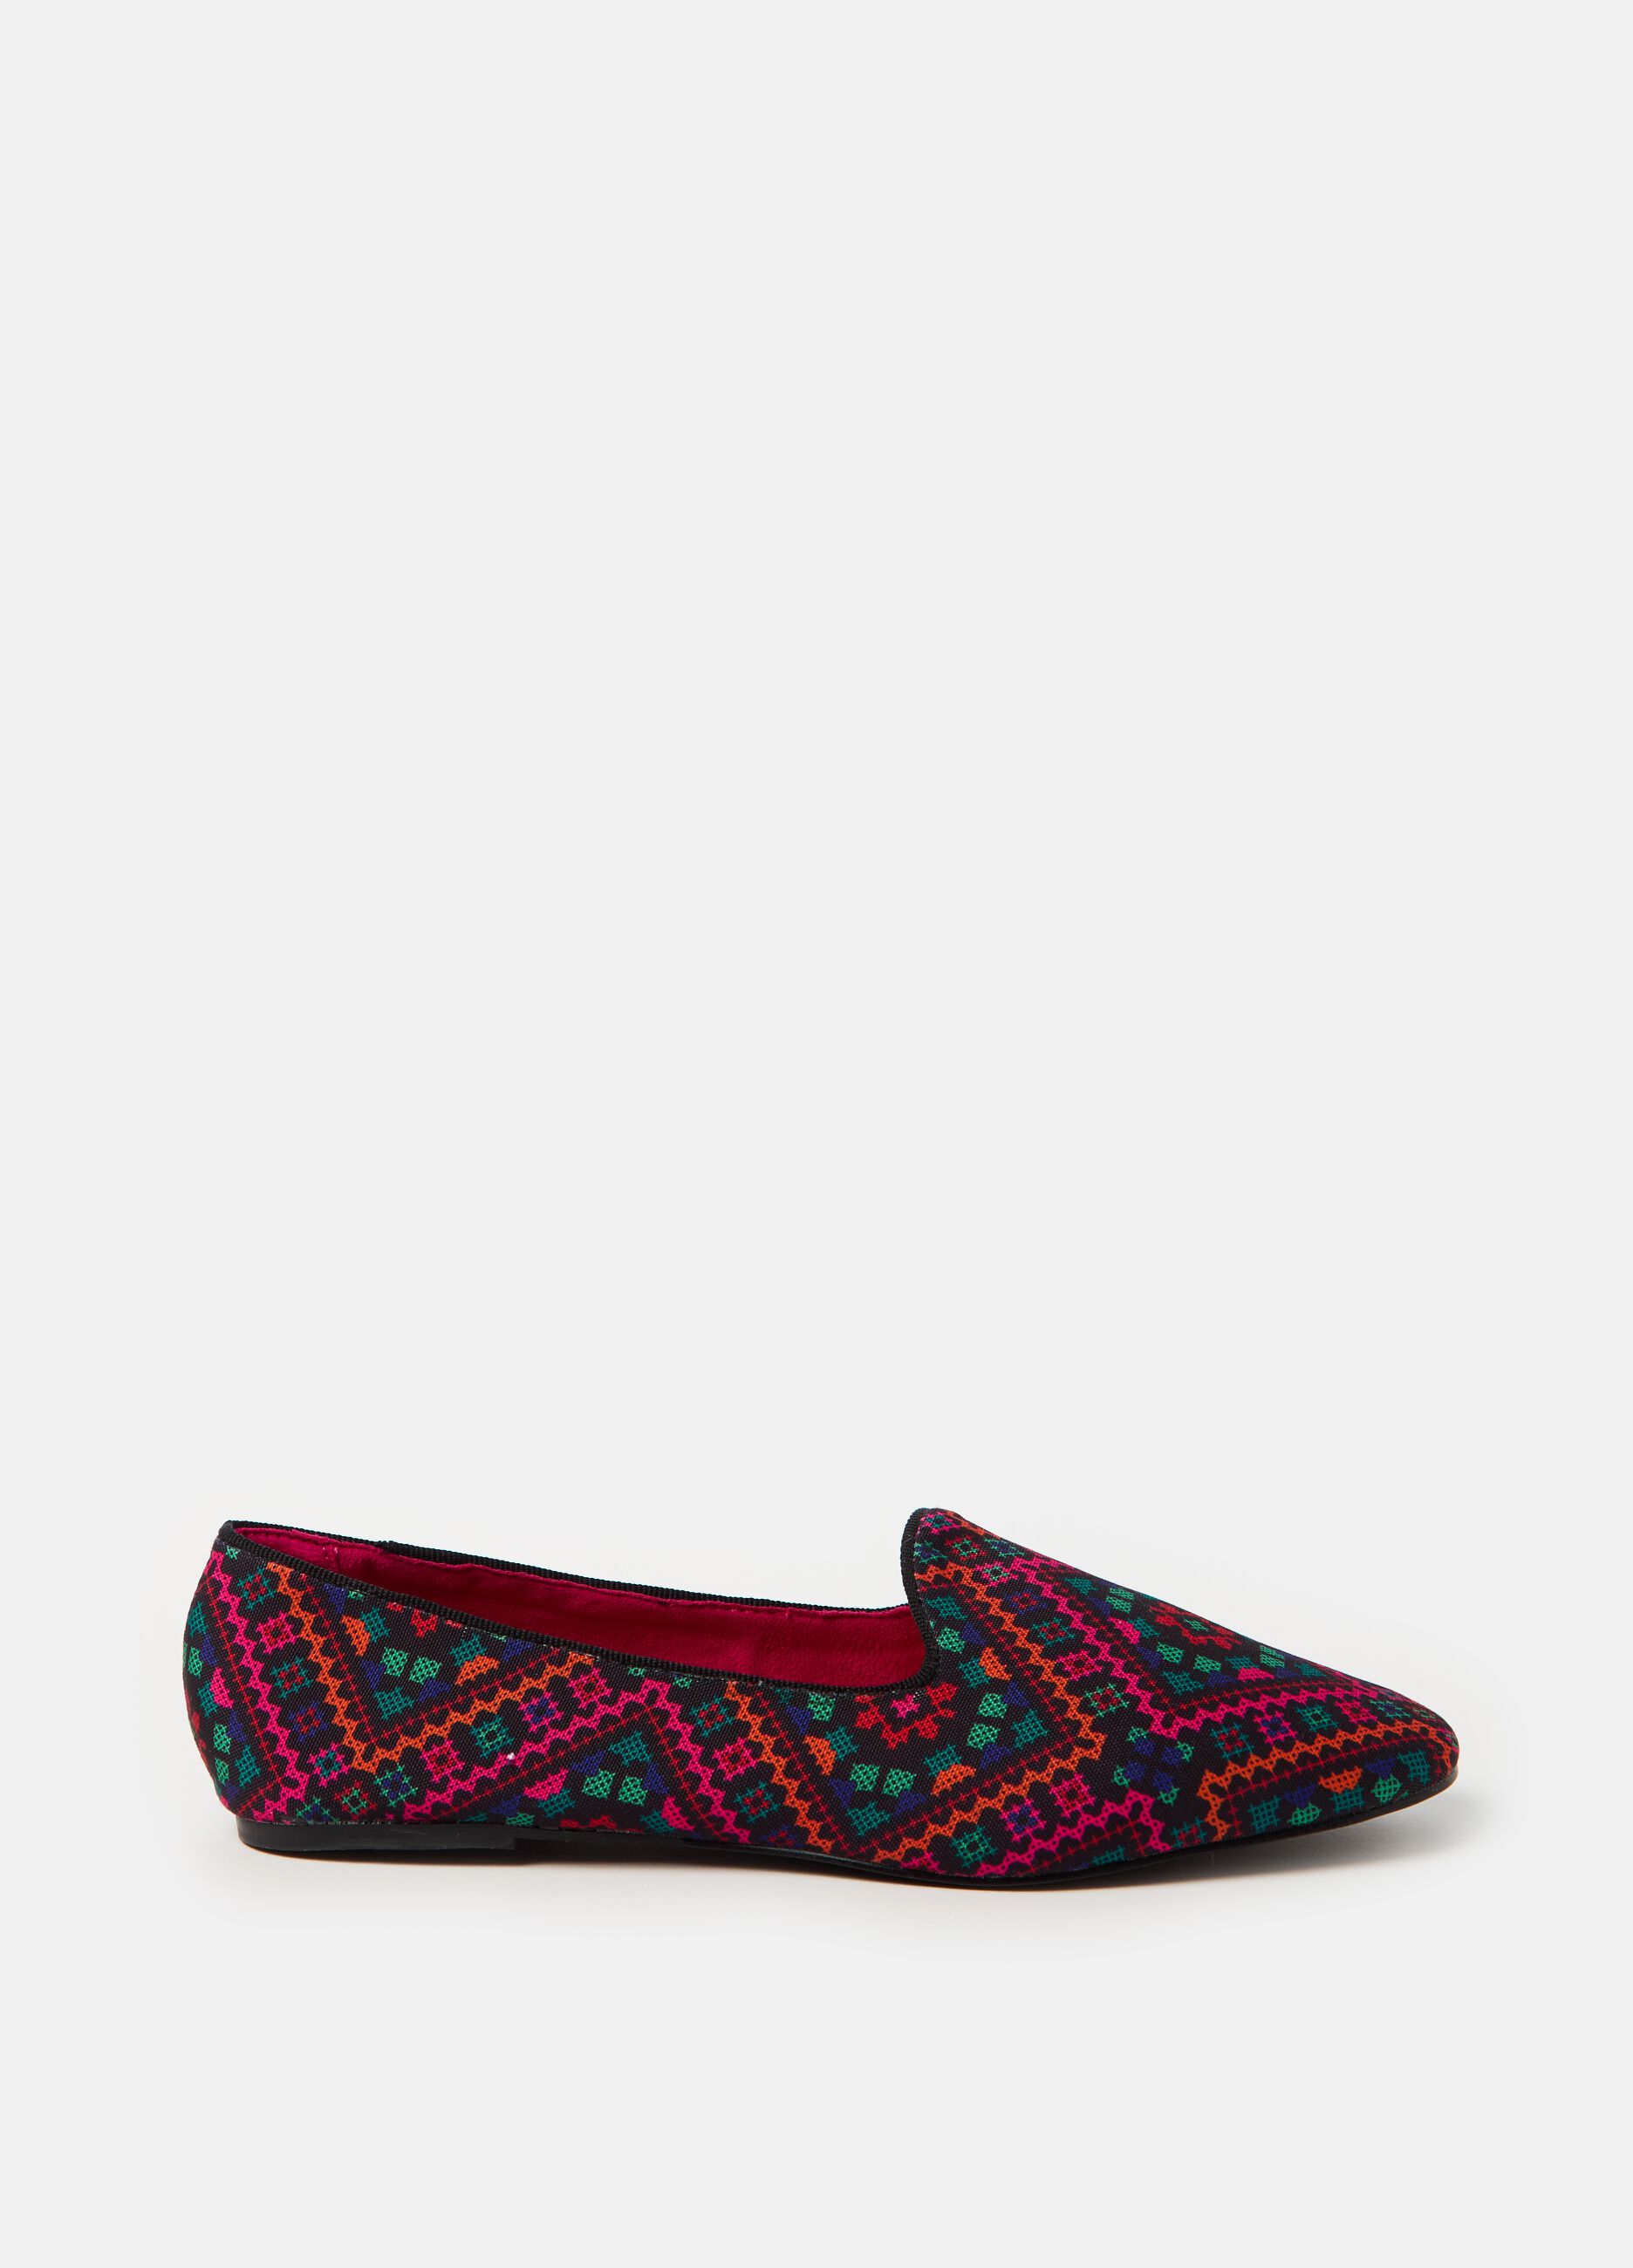 Slipper shoes with geometric pattern_0